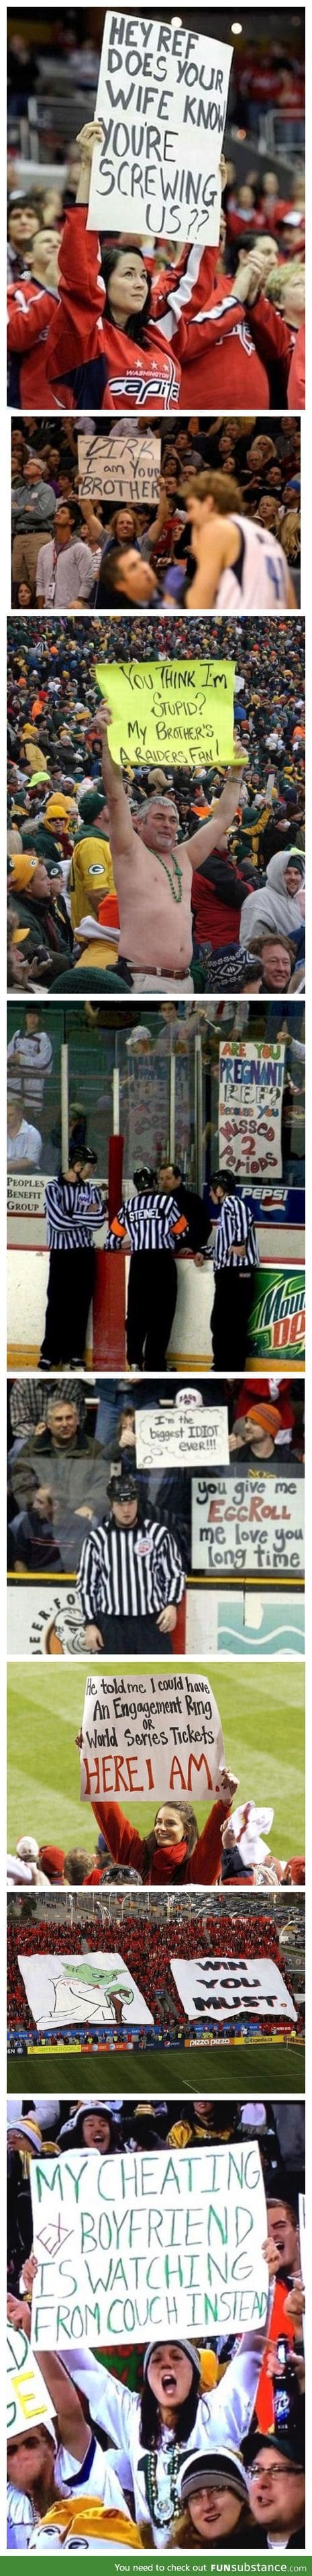 Funny Spectator Signs